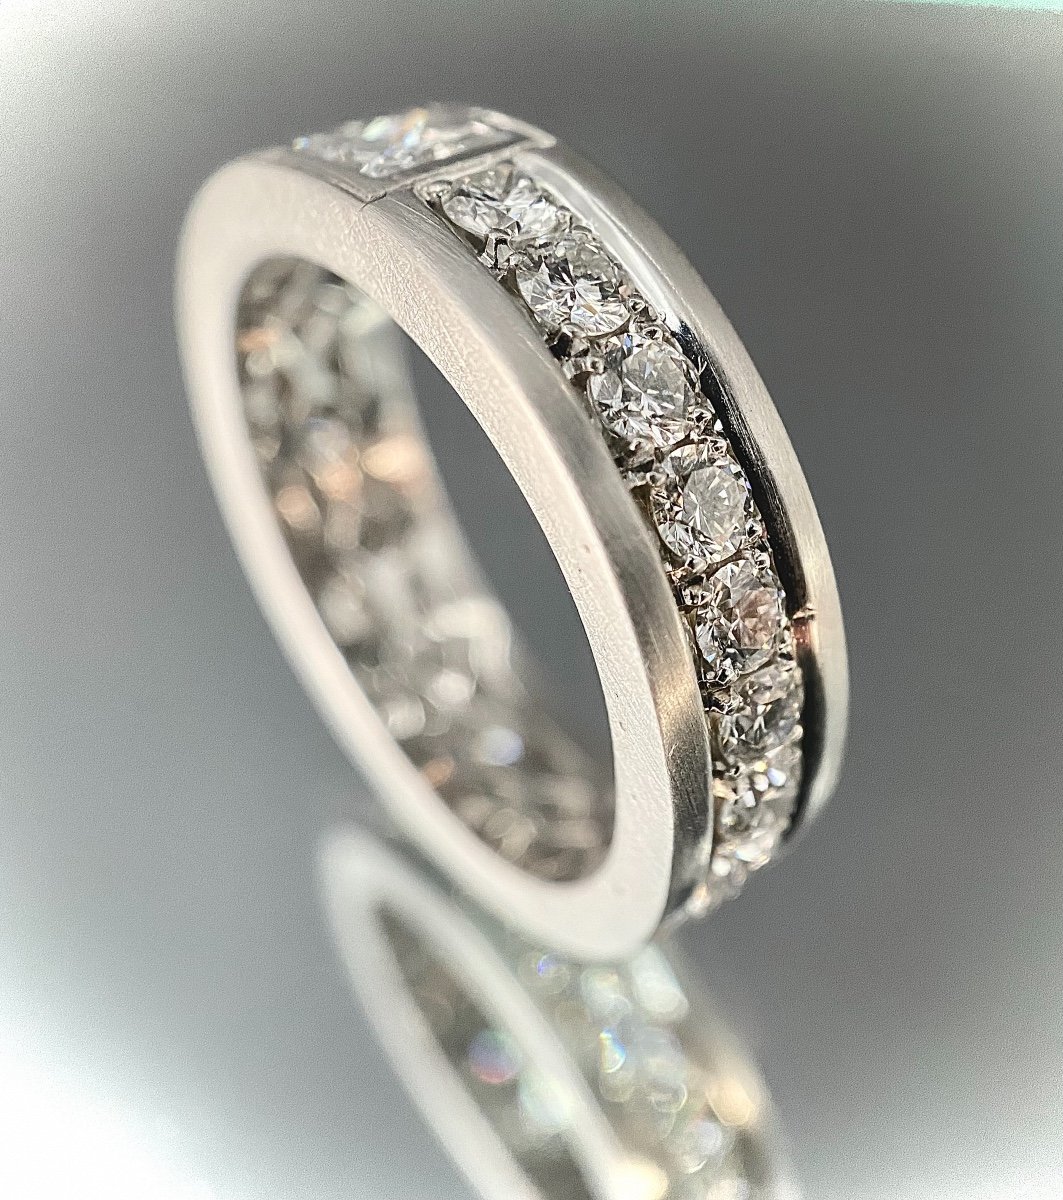 Alliance Ring In White Gold Set With A 0.75 Carat Princess Diamond + 3.6 Carats Of Brilliants-photo-3